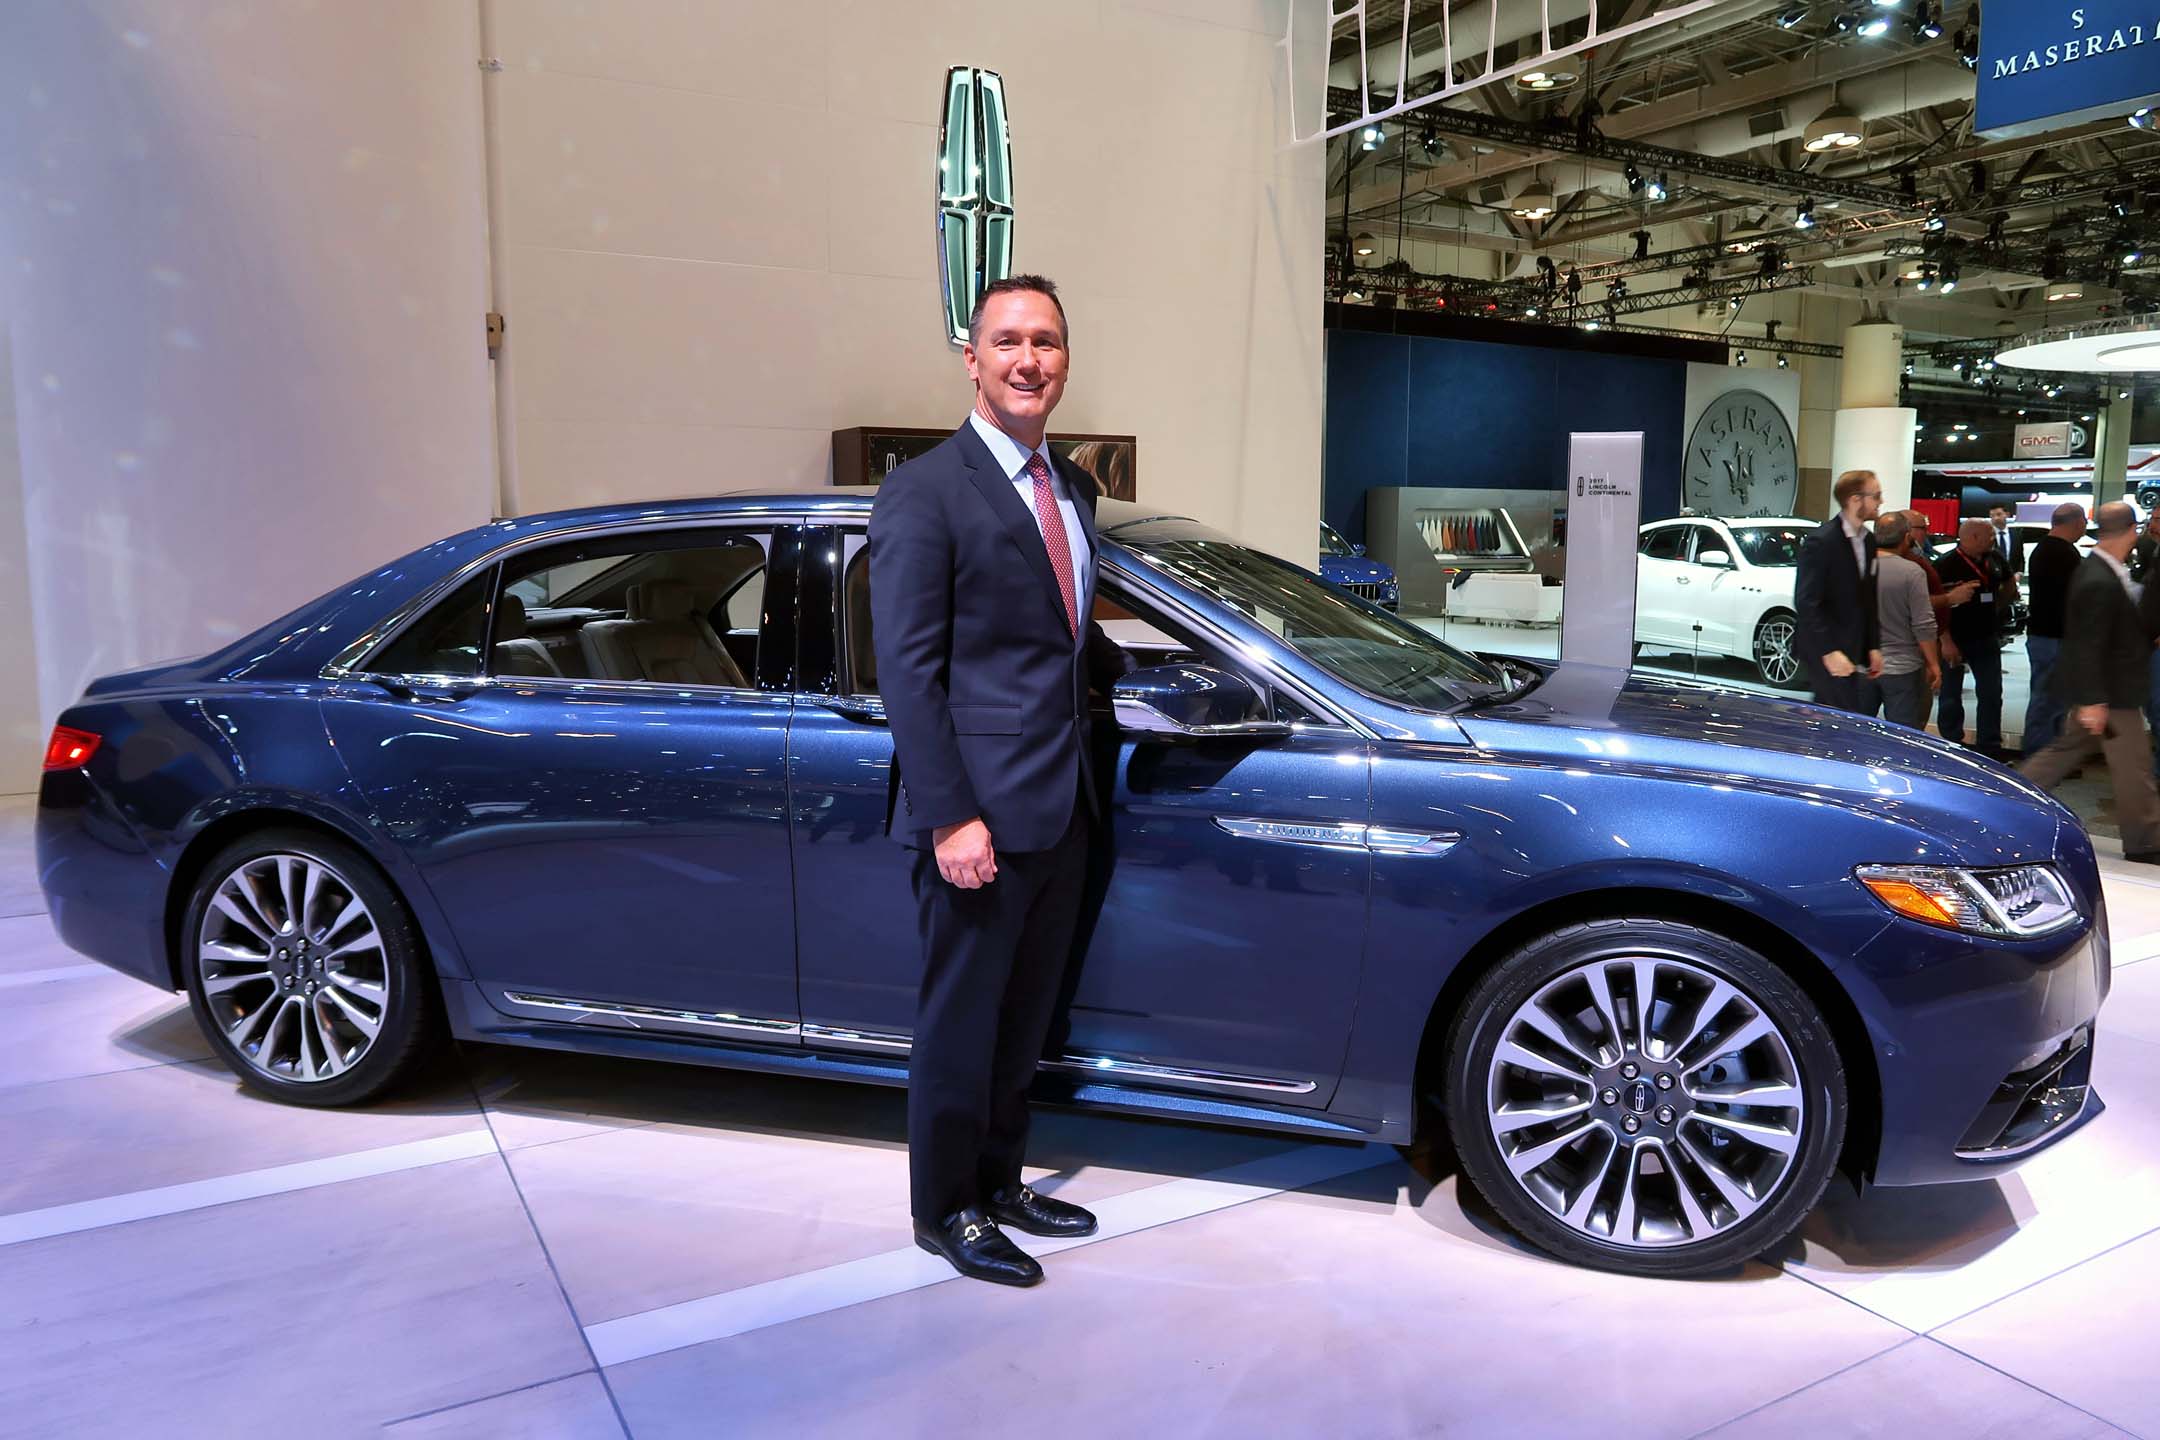 Mark Buzzell, president and CEO of Ford of Canada, with the Lincoln Continental</p>
<p>Photo: Jil McIntosh